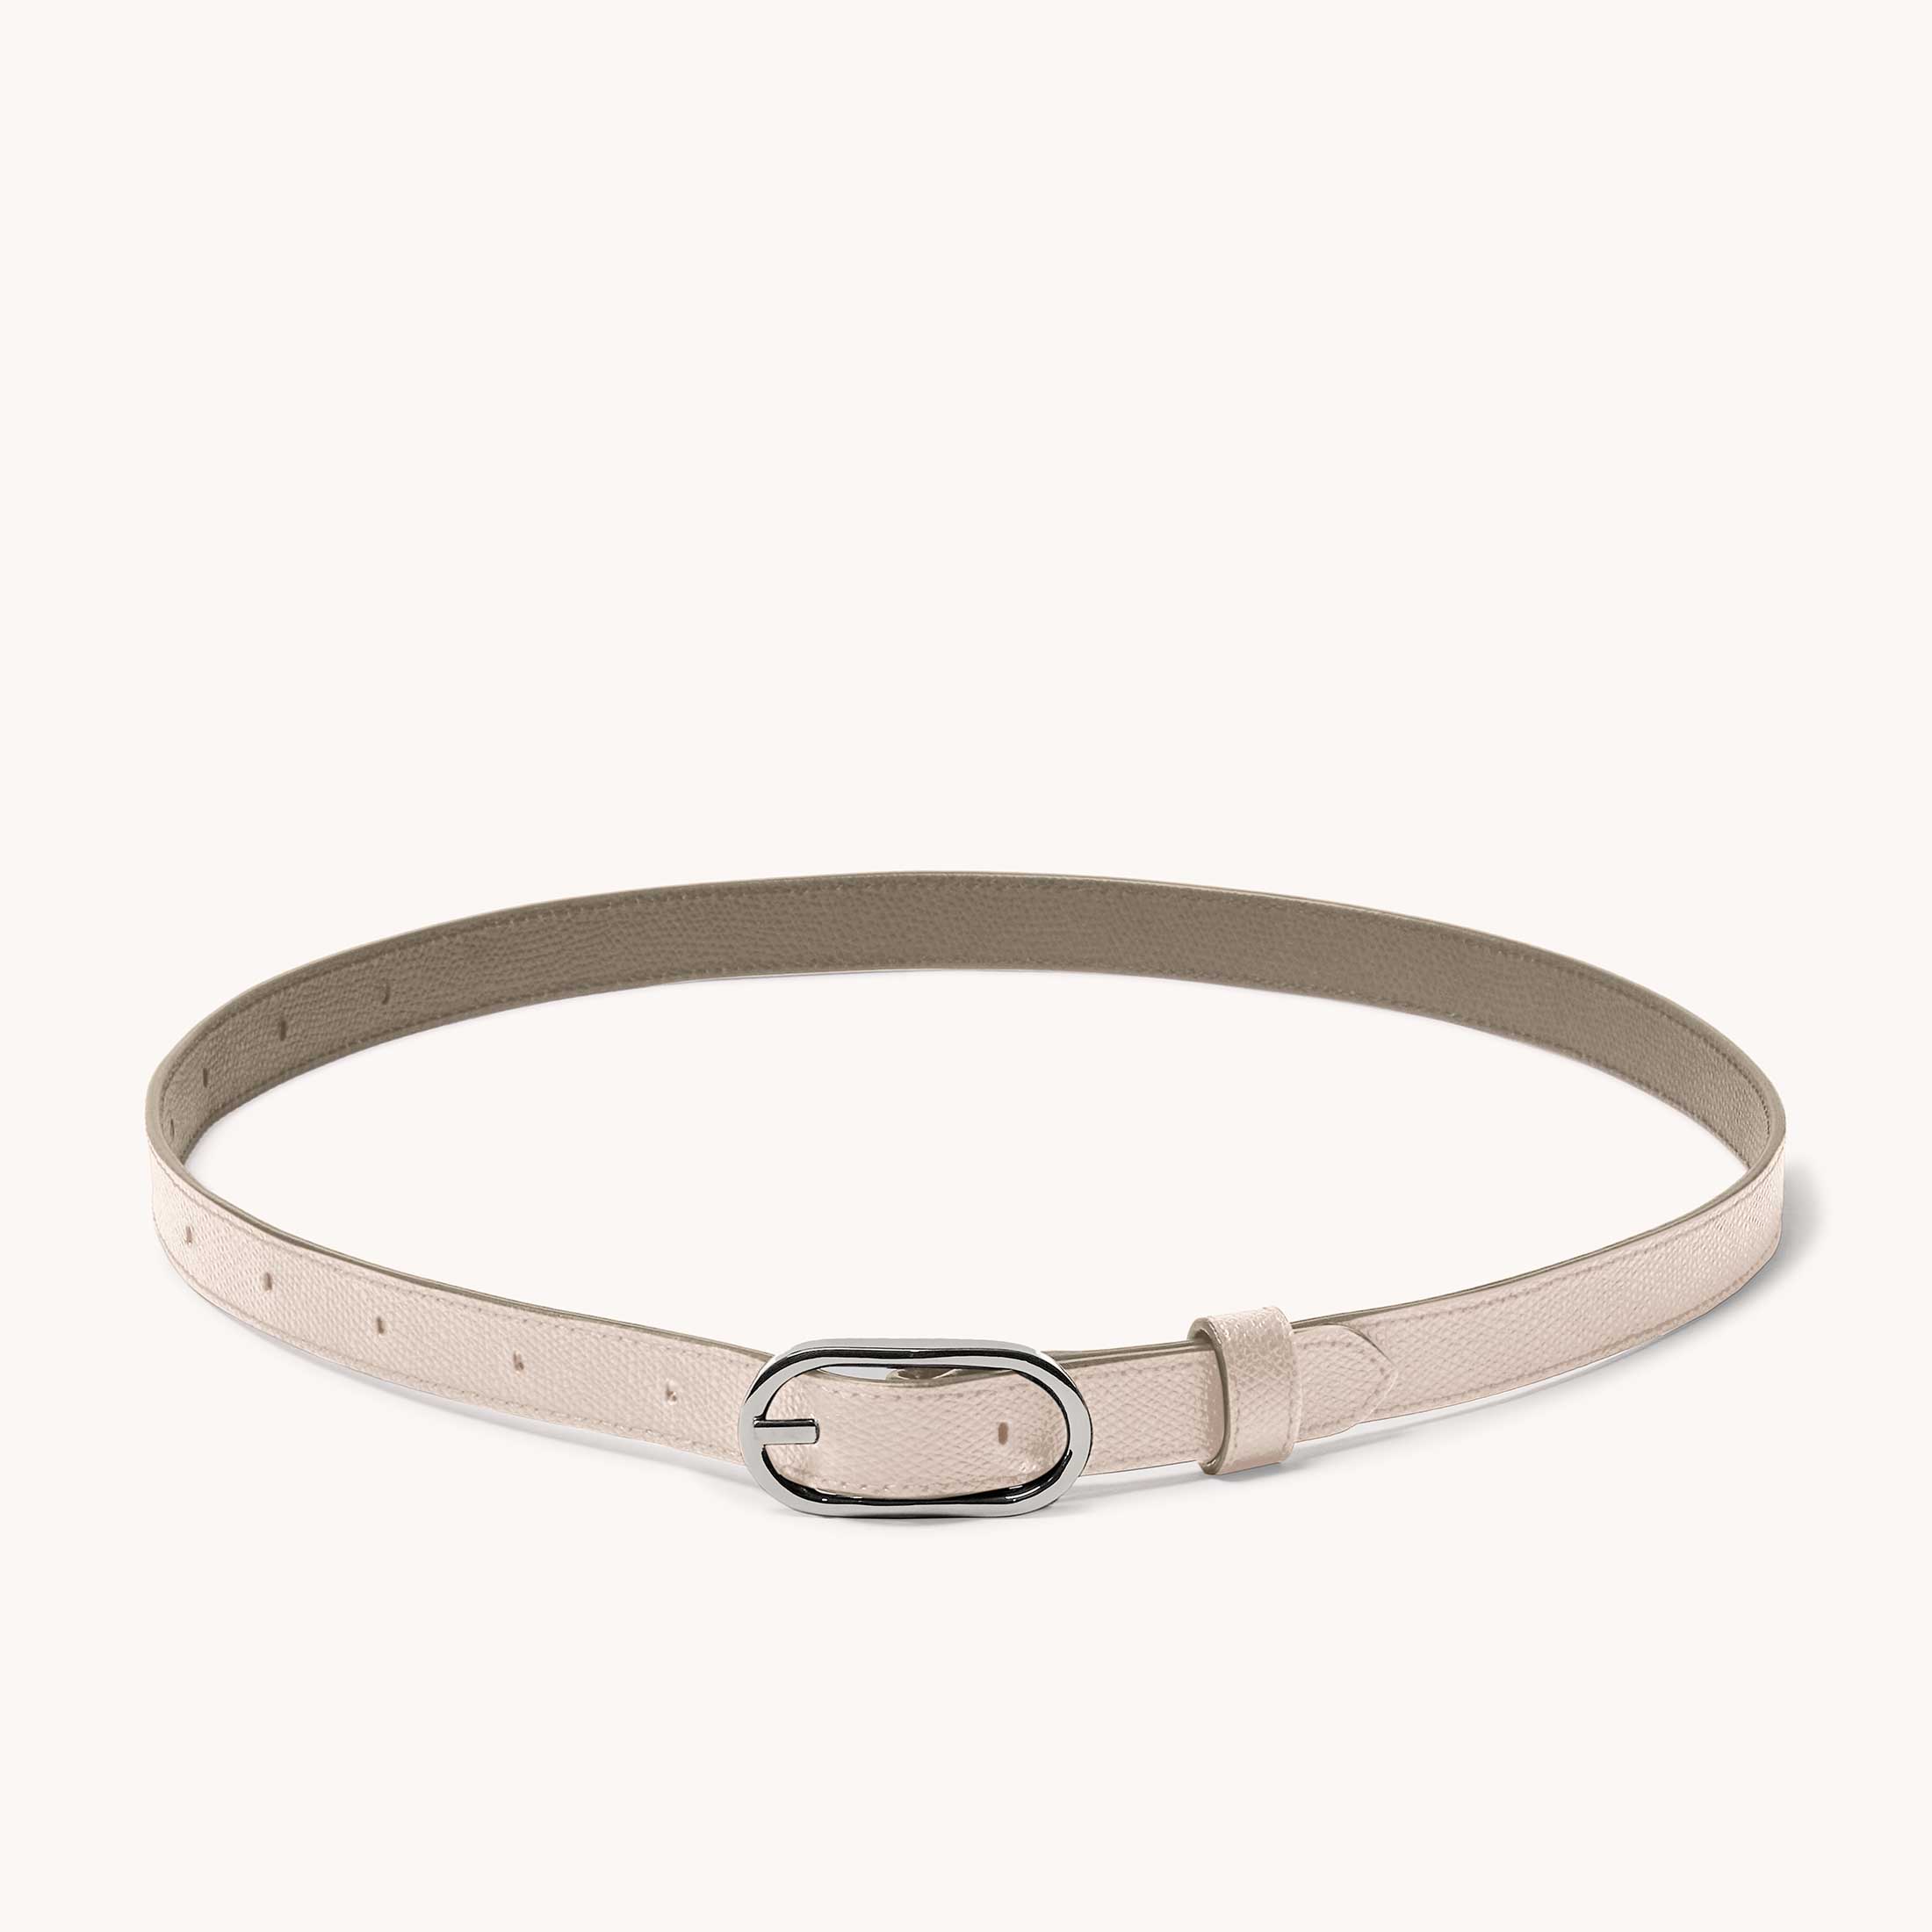 Reversible Shoulder Strap Colorblock Blush/Sand with Silver Hardware in a Loop
